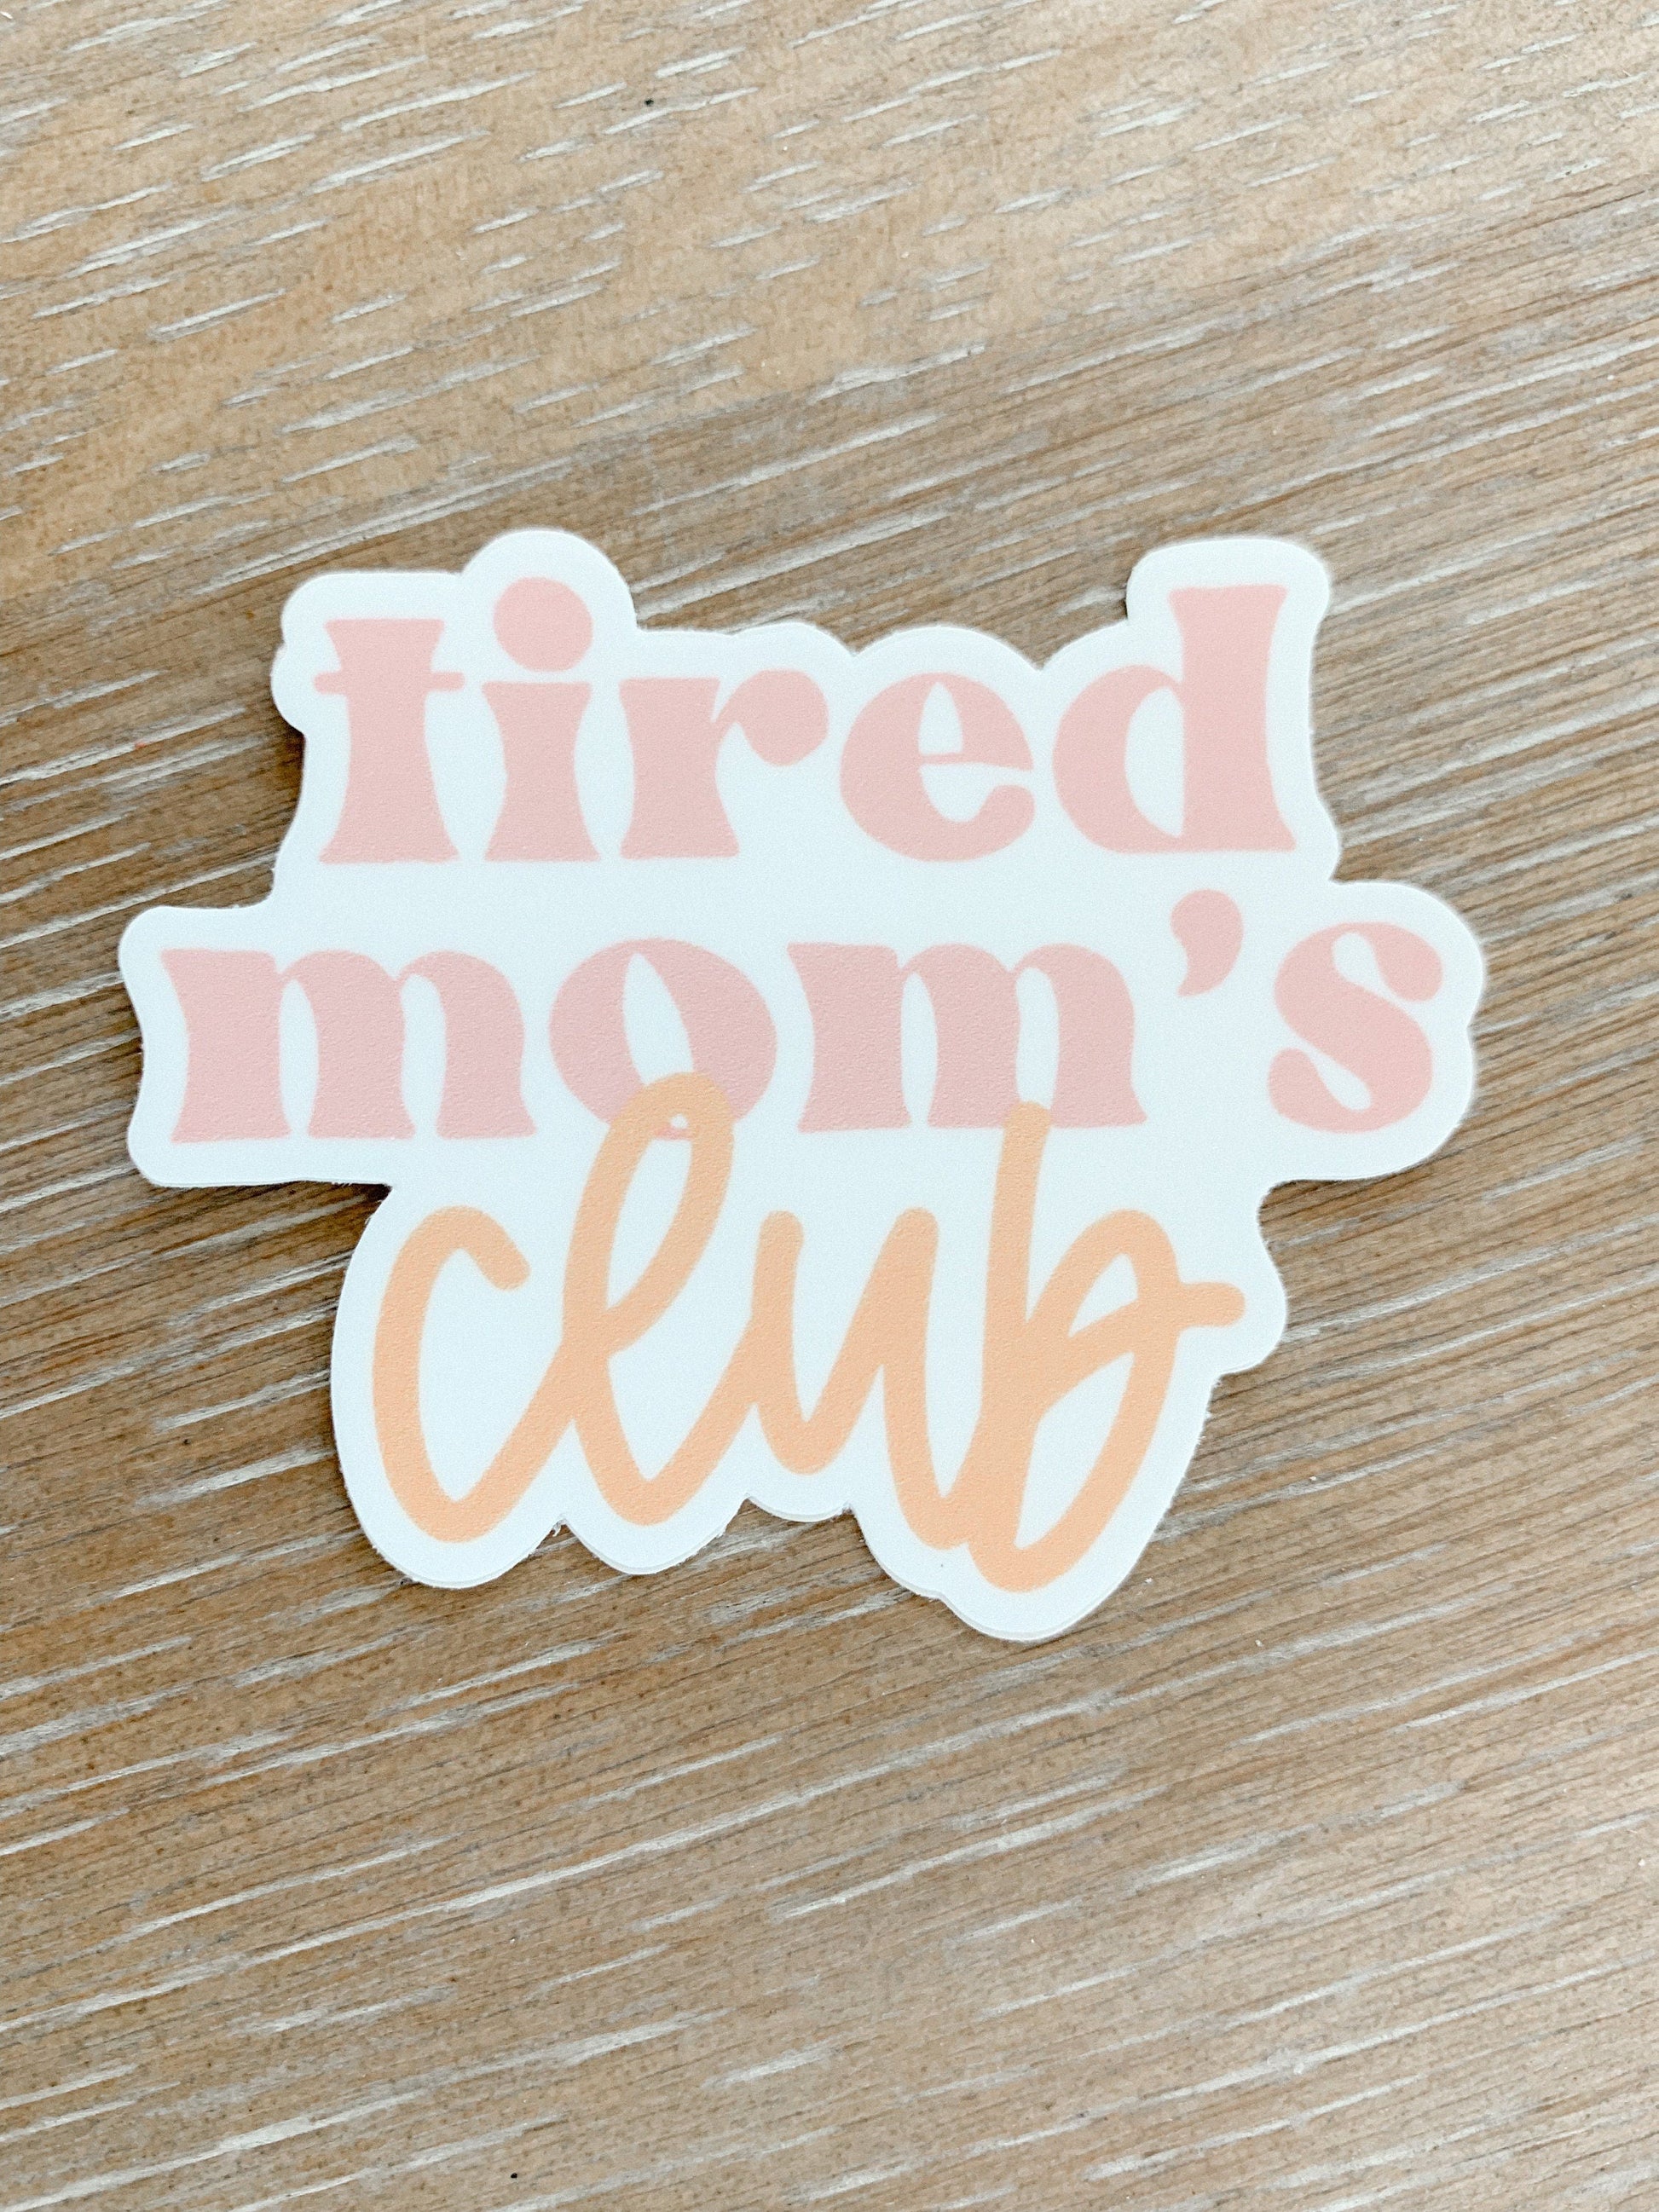 Tired Mom's Club Sticker | Mom Life Sticker | Mom Sticker | Laptop Sticker | Hydroflask Sticker | Gift for Mom | Mother’s Day gifts - Shop Donuts and Daisies